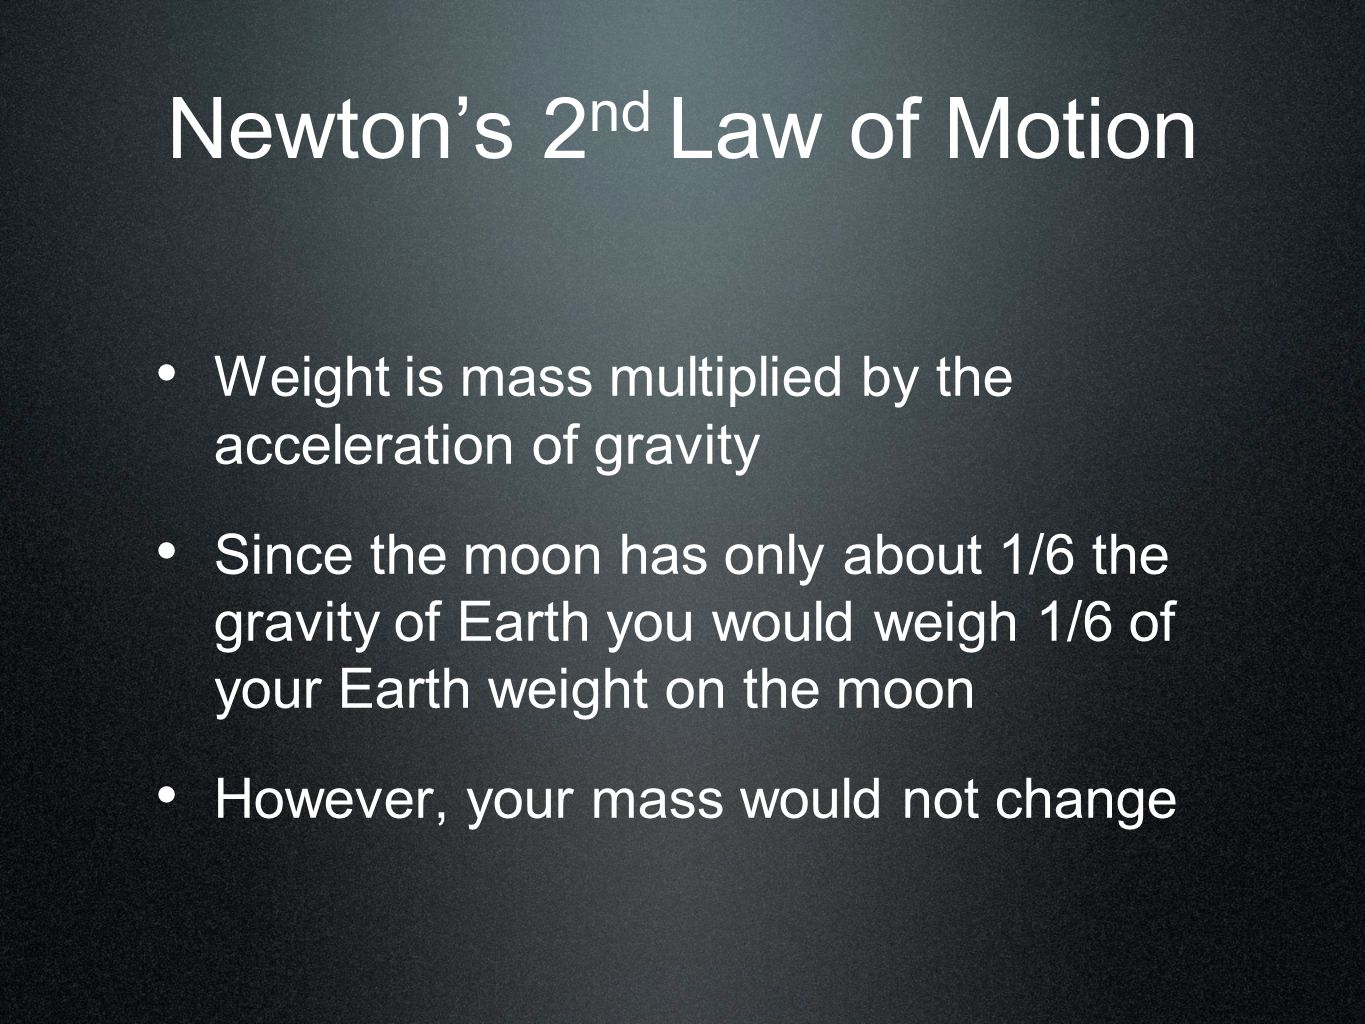 Newton’s 2 nd Law of Motion Weight is mass multiplied by the acceleration of gravity Since the moon has only about 1/6 the gravity of Earth you would weigh 1/6 of your Earth weight on the moon However, your mass would not change